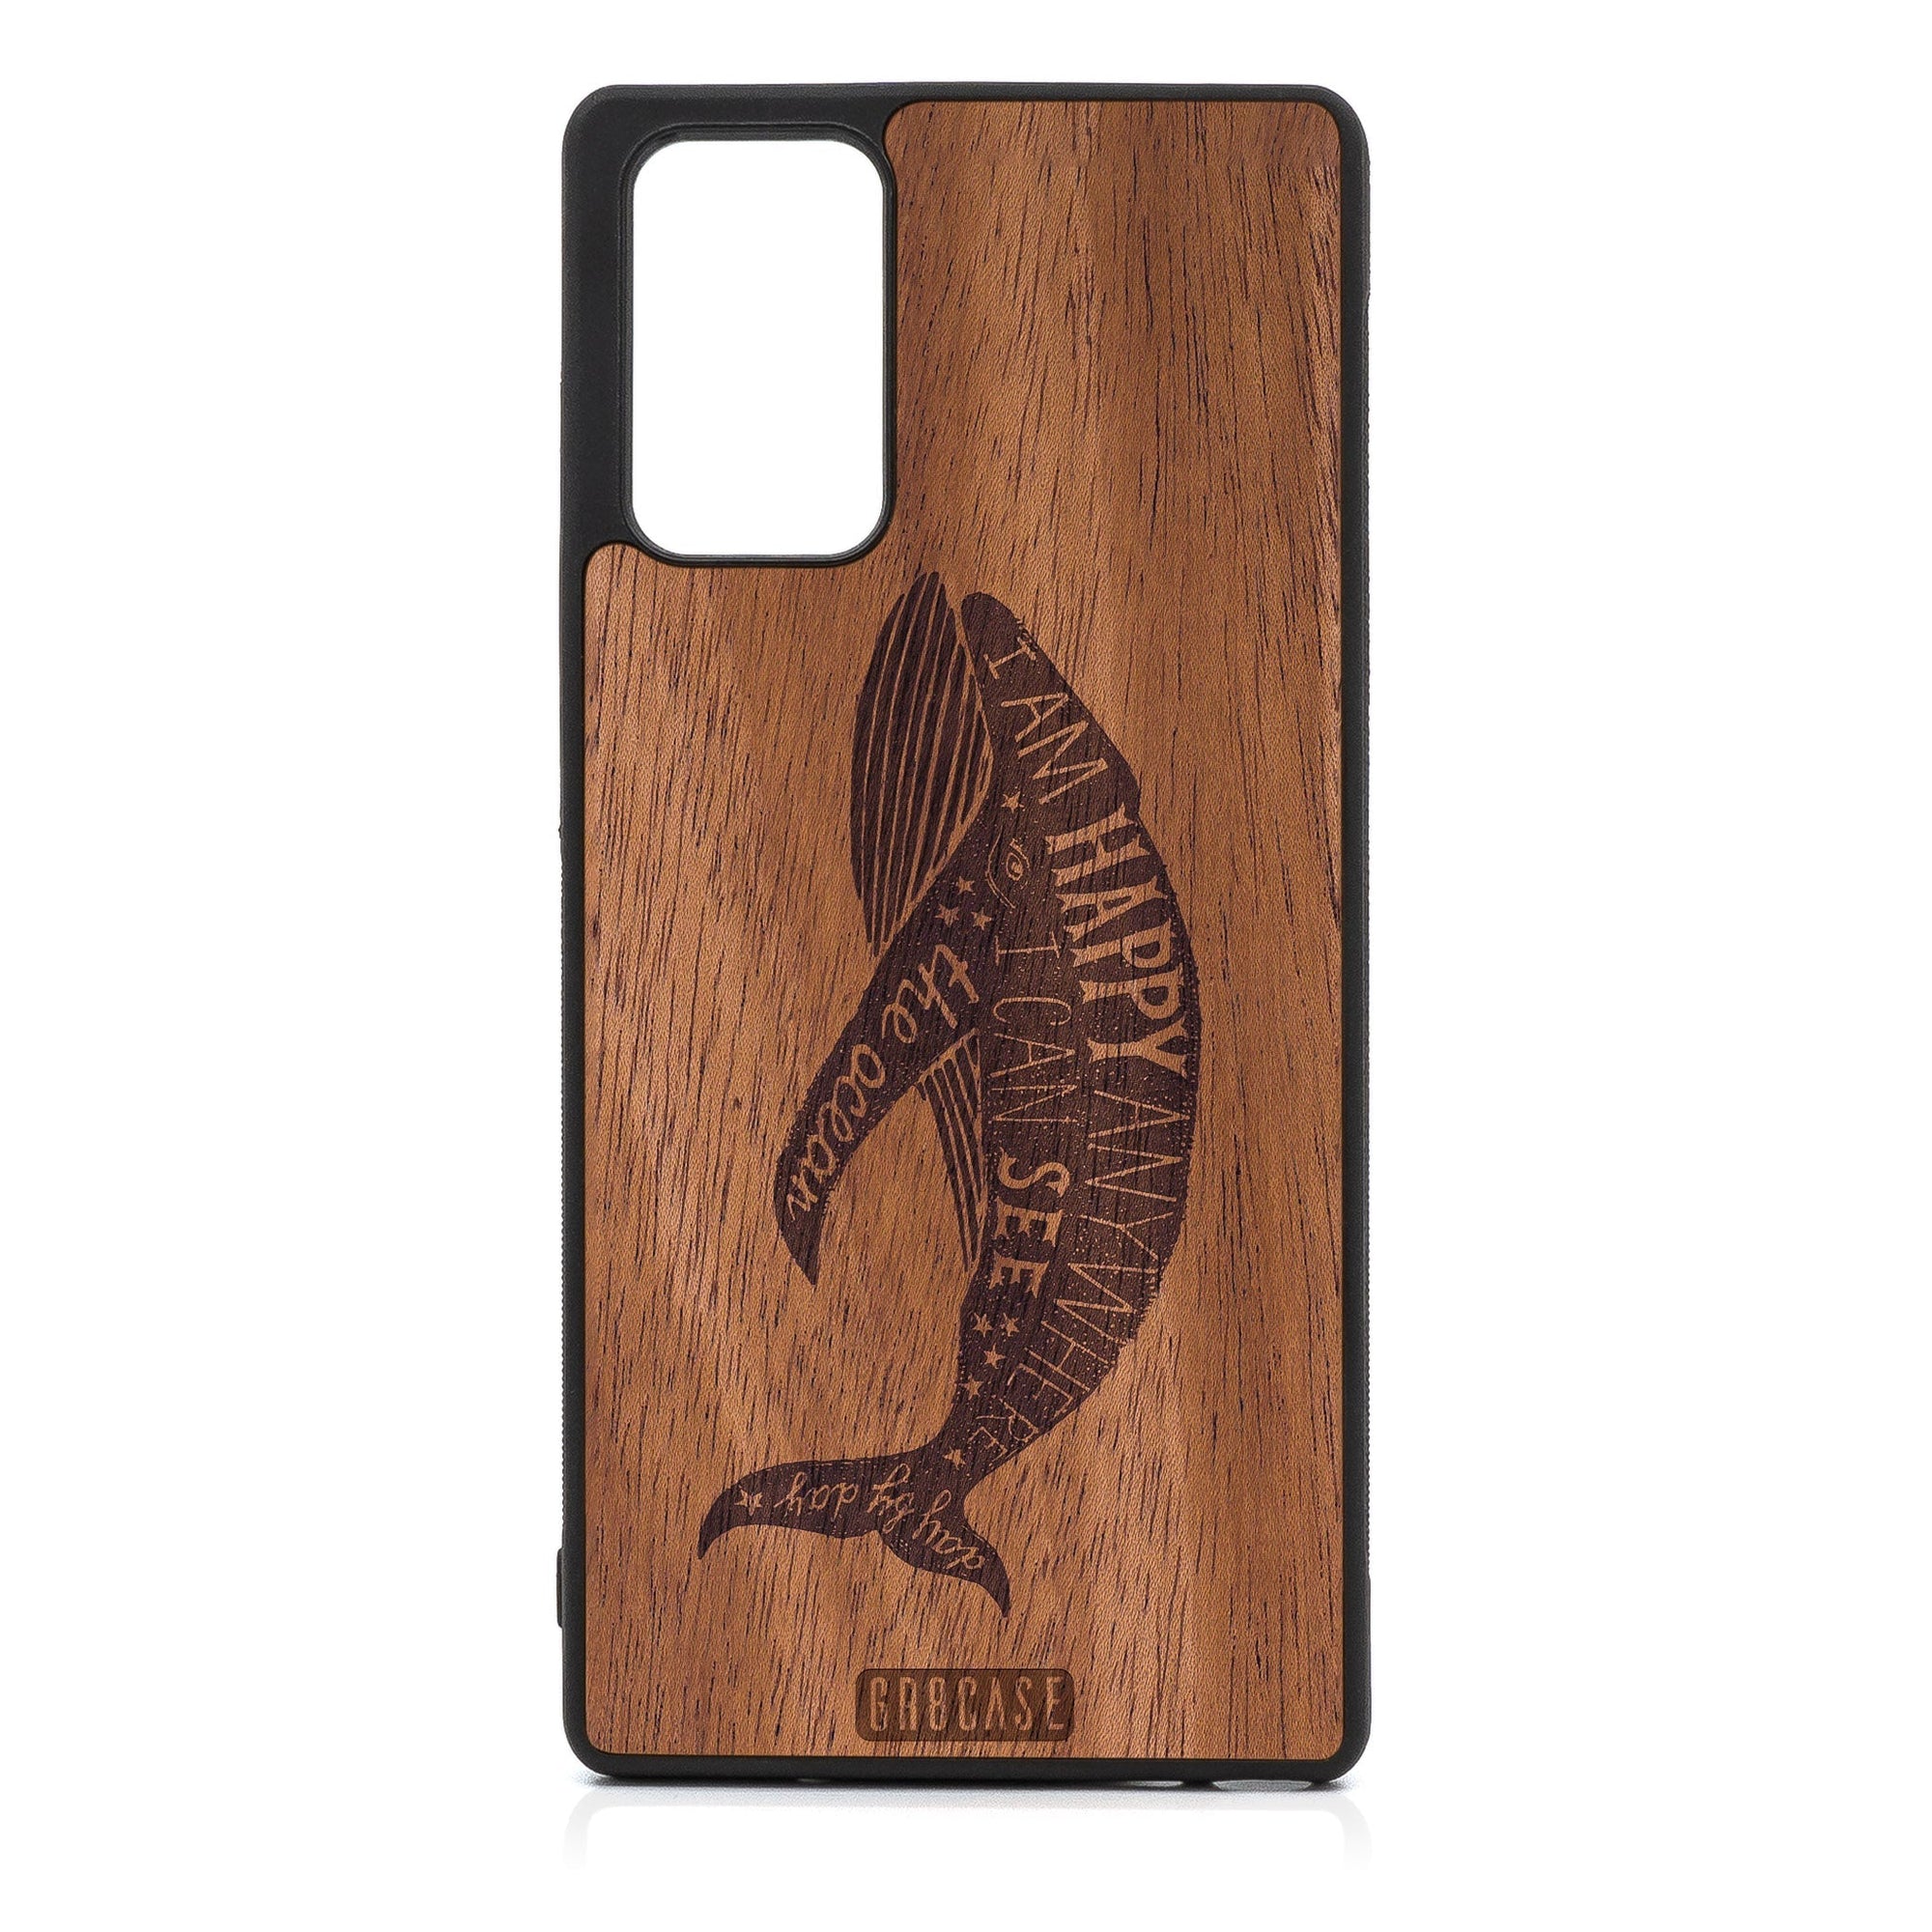 I'm Happy Anywhere I Can See The Ocean (Whale) Design Wood Case For Samsung Galaxy A72 5G